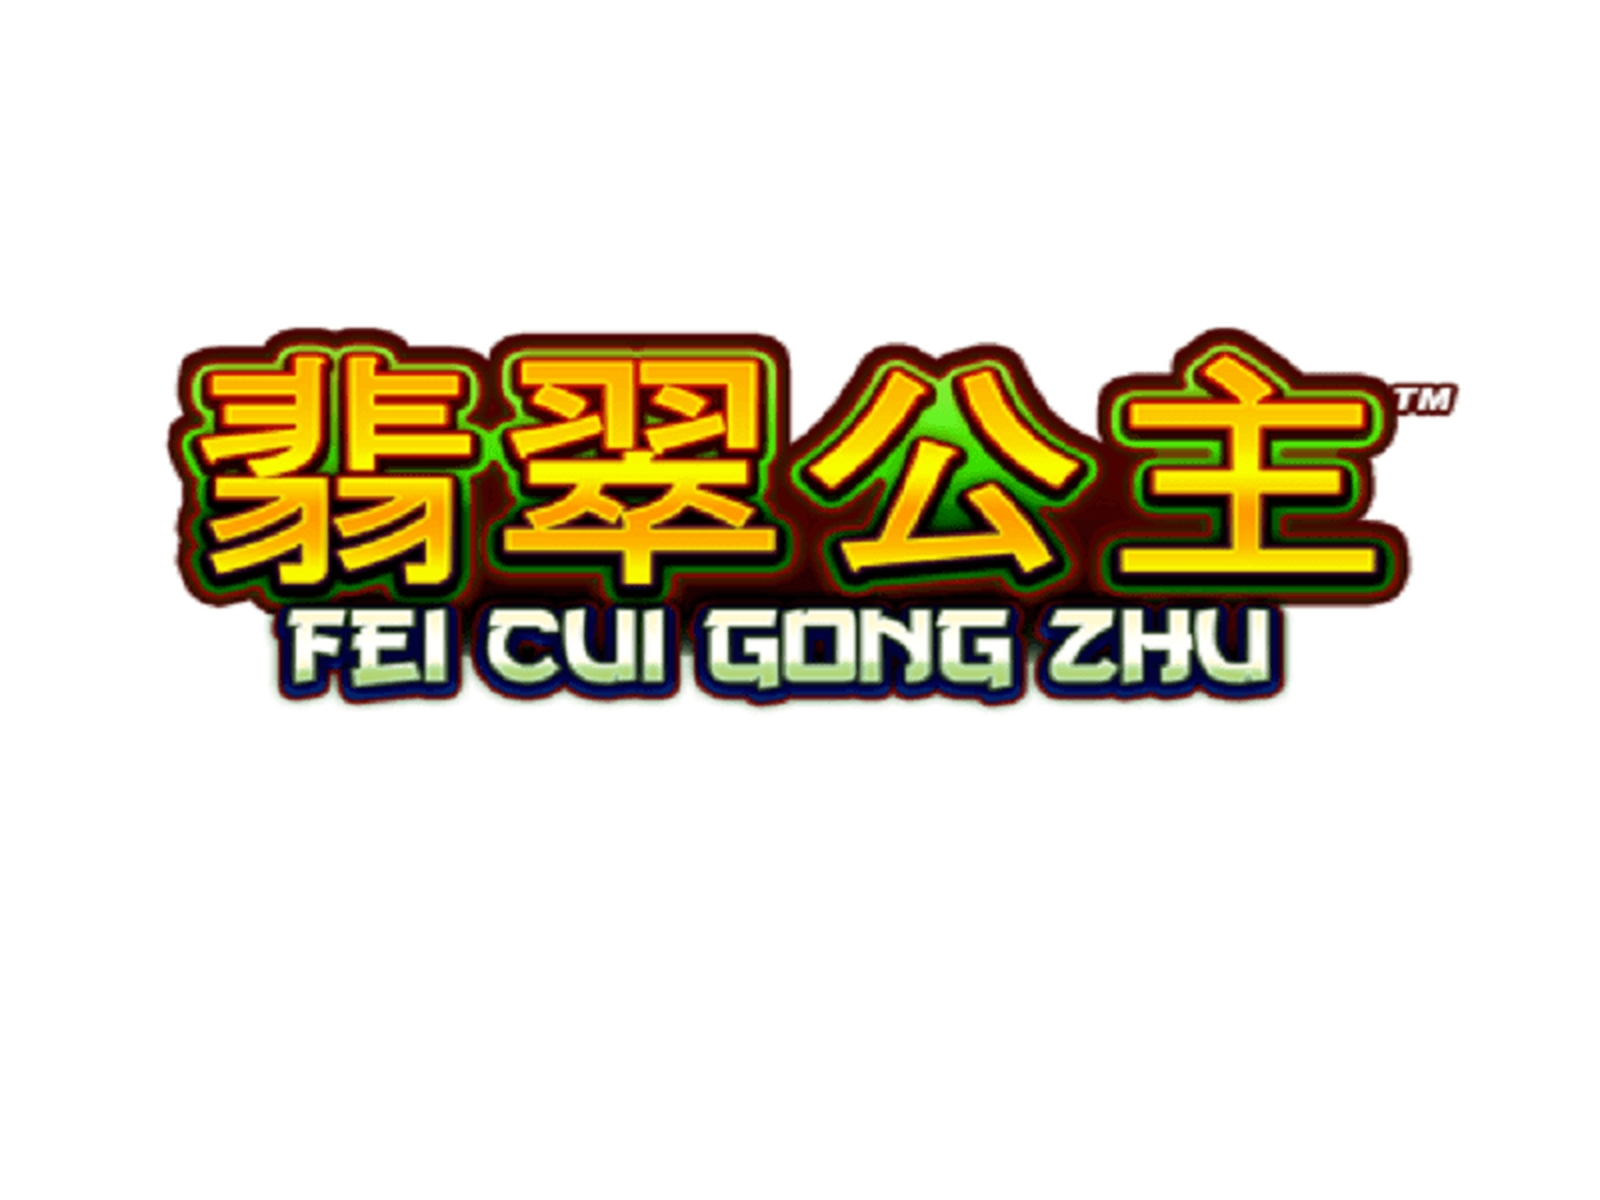 The Fei Cui Gong Zhu Online Slot Demo Game by Playtech